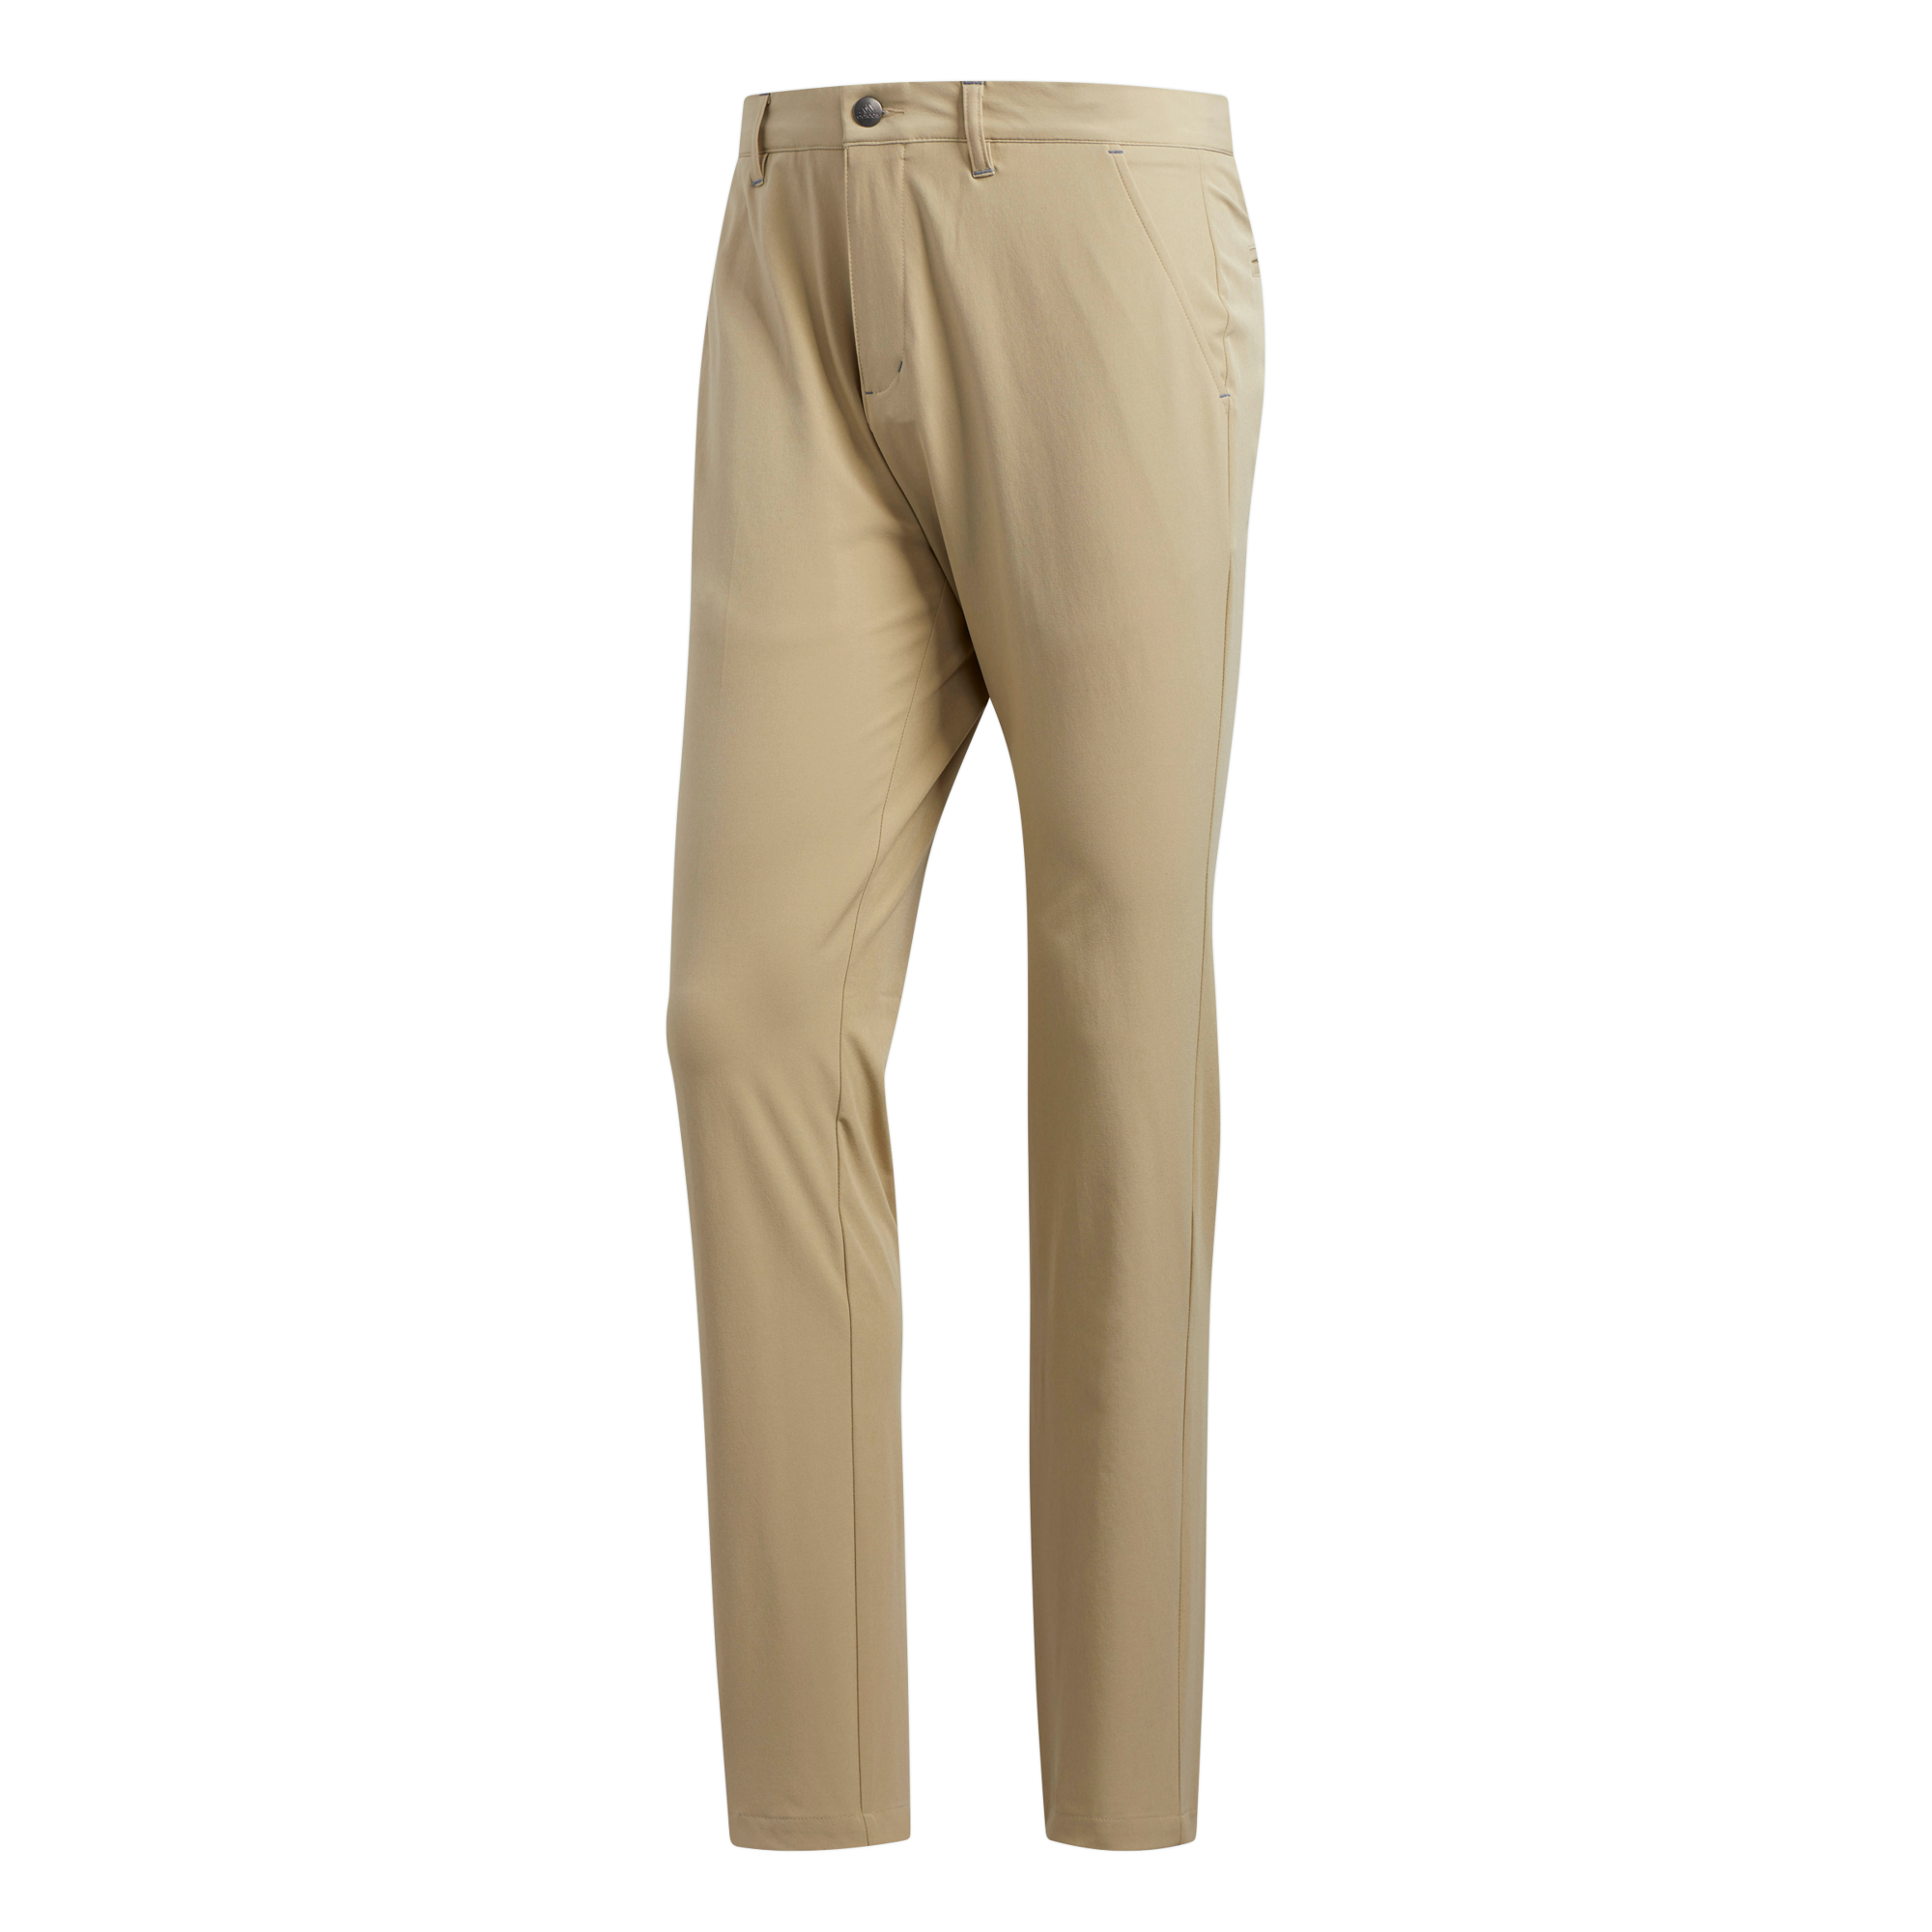 RAW GOLD "ULTIMATE' TAPERED GOLF TROUSER - MEN